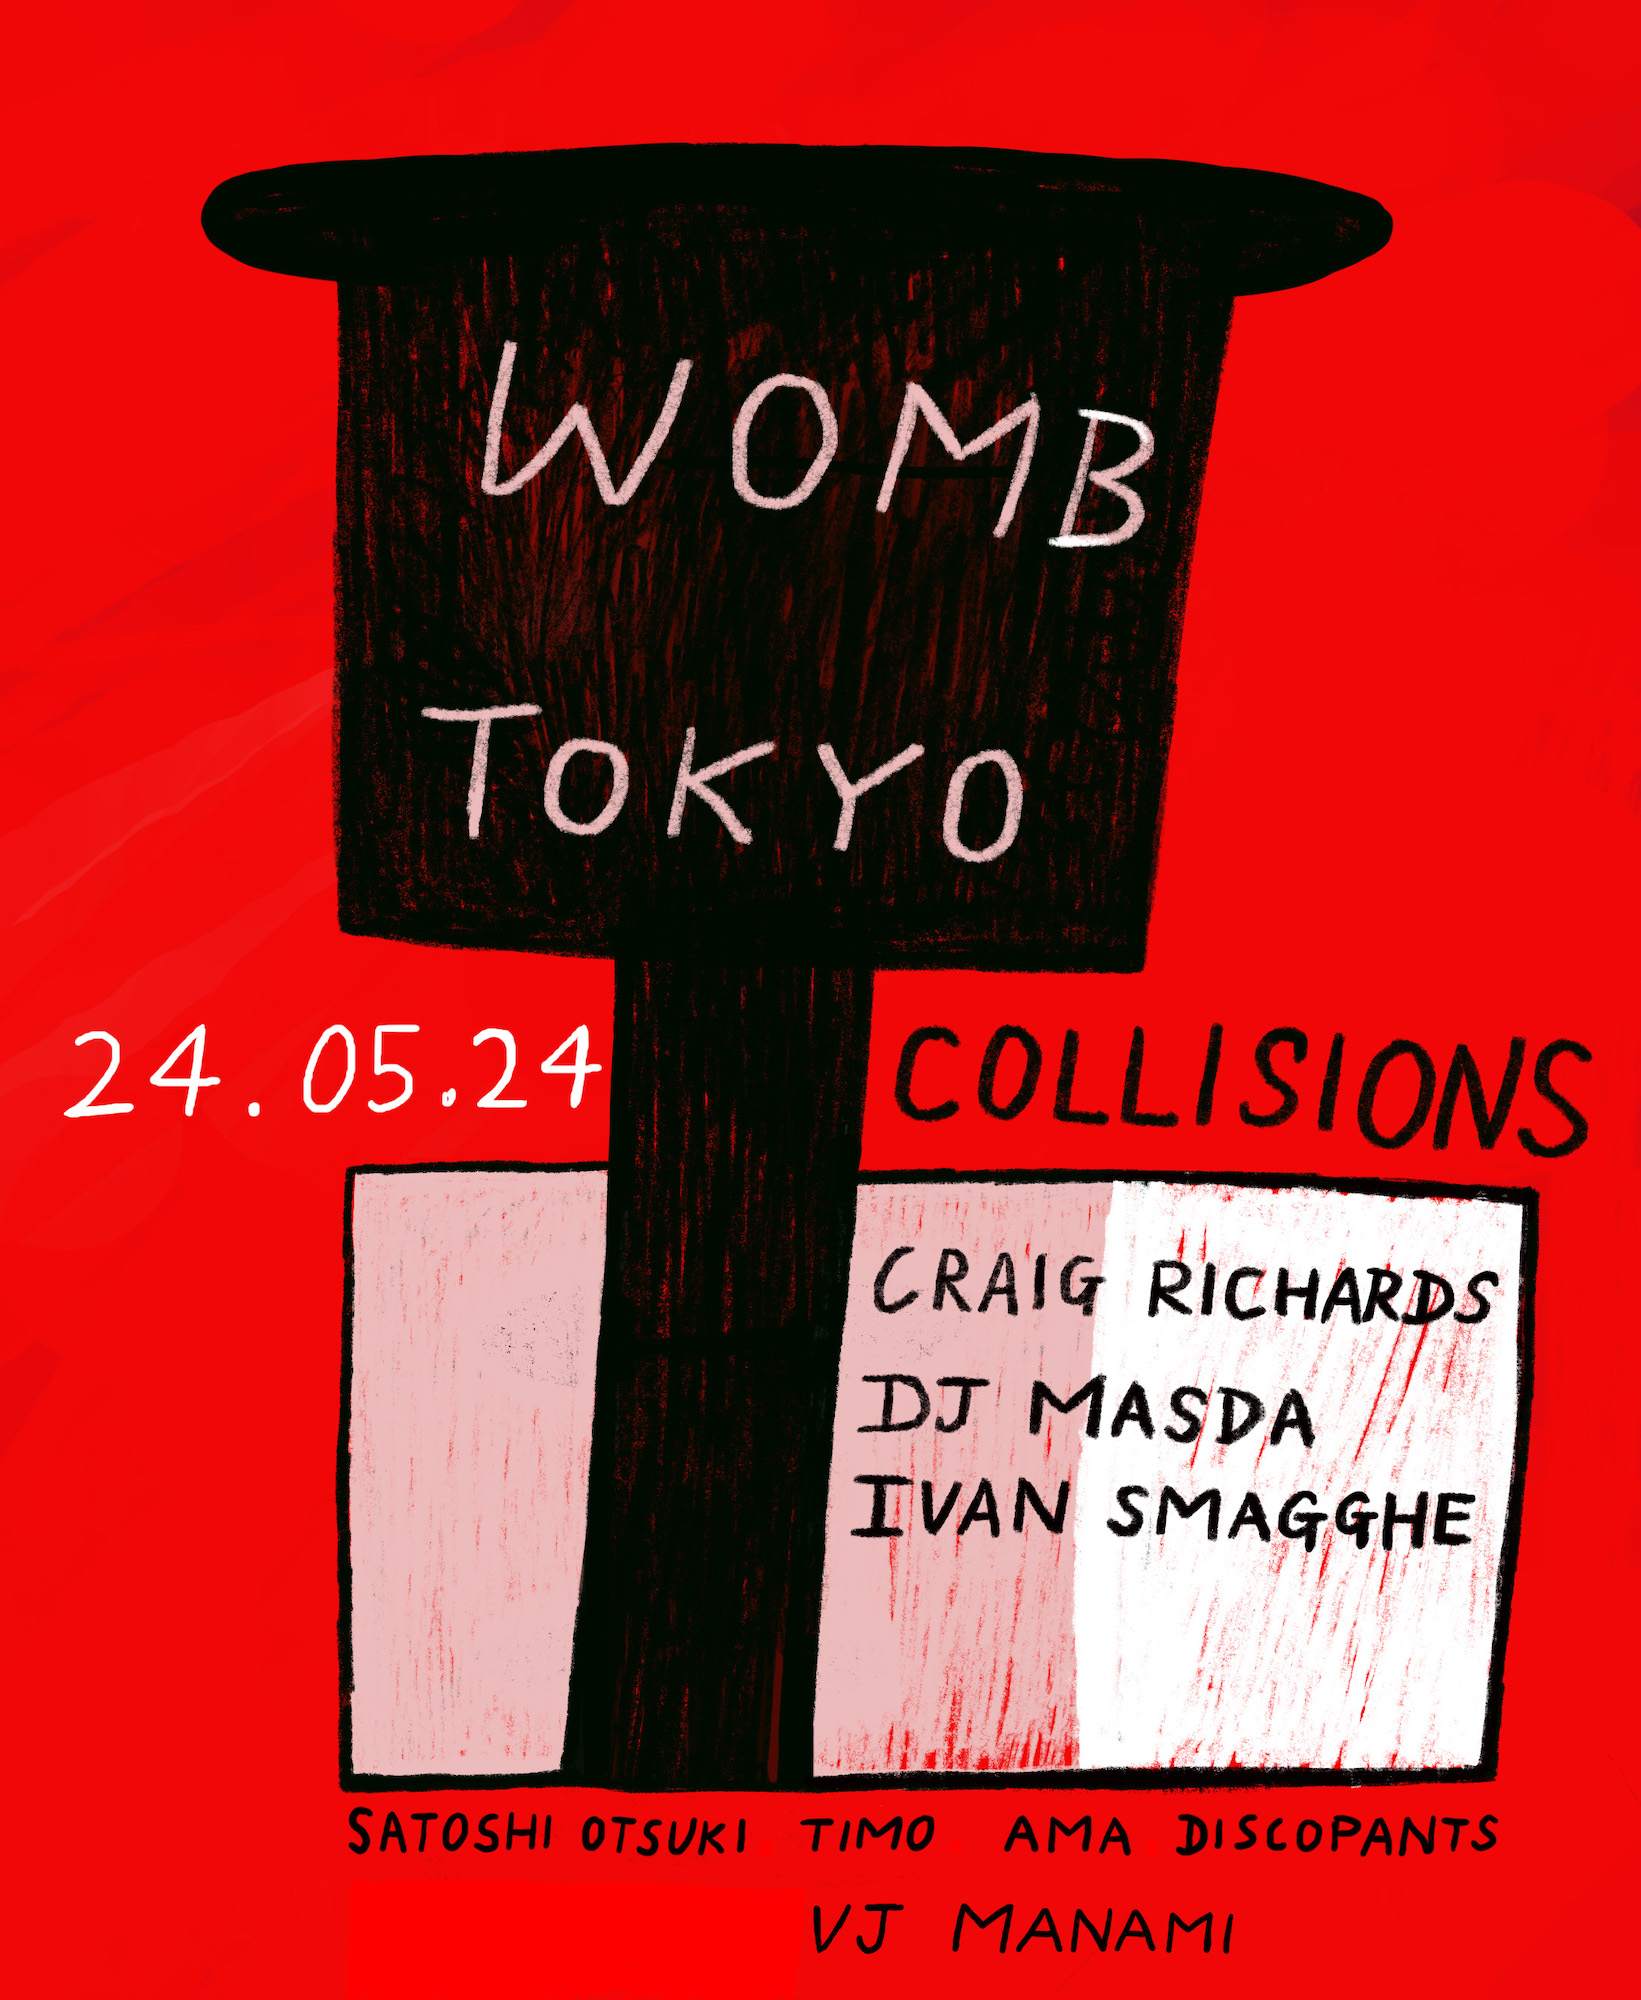 COLLISIONS at WOMB, Tokyo